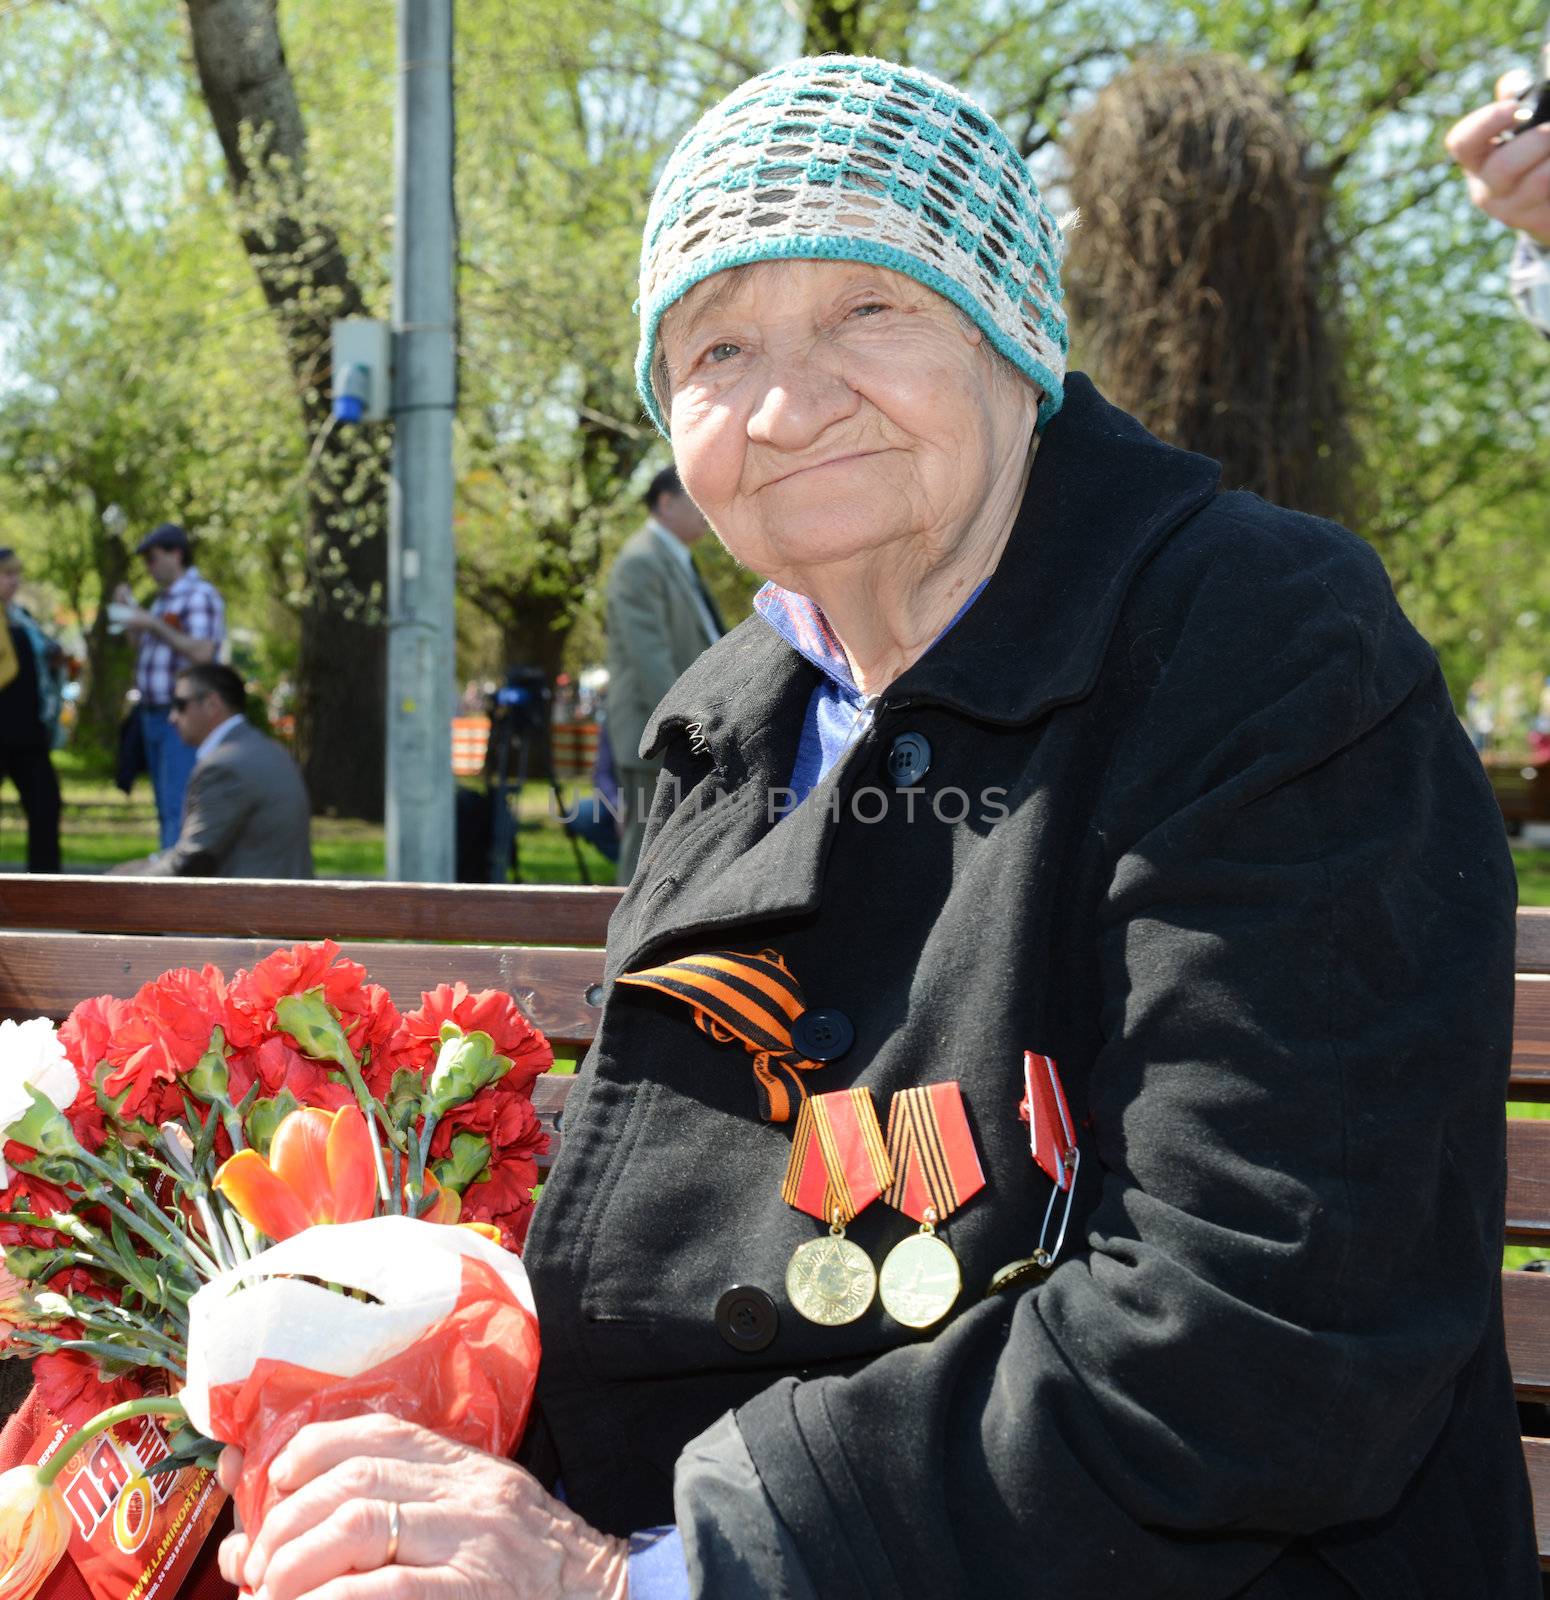  Moscow, Russia - May 9, 2013: Old woman veteran of WWII  bearing bunch of flowers during festivities devoted to 68th anniversary of Victory Day.